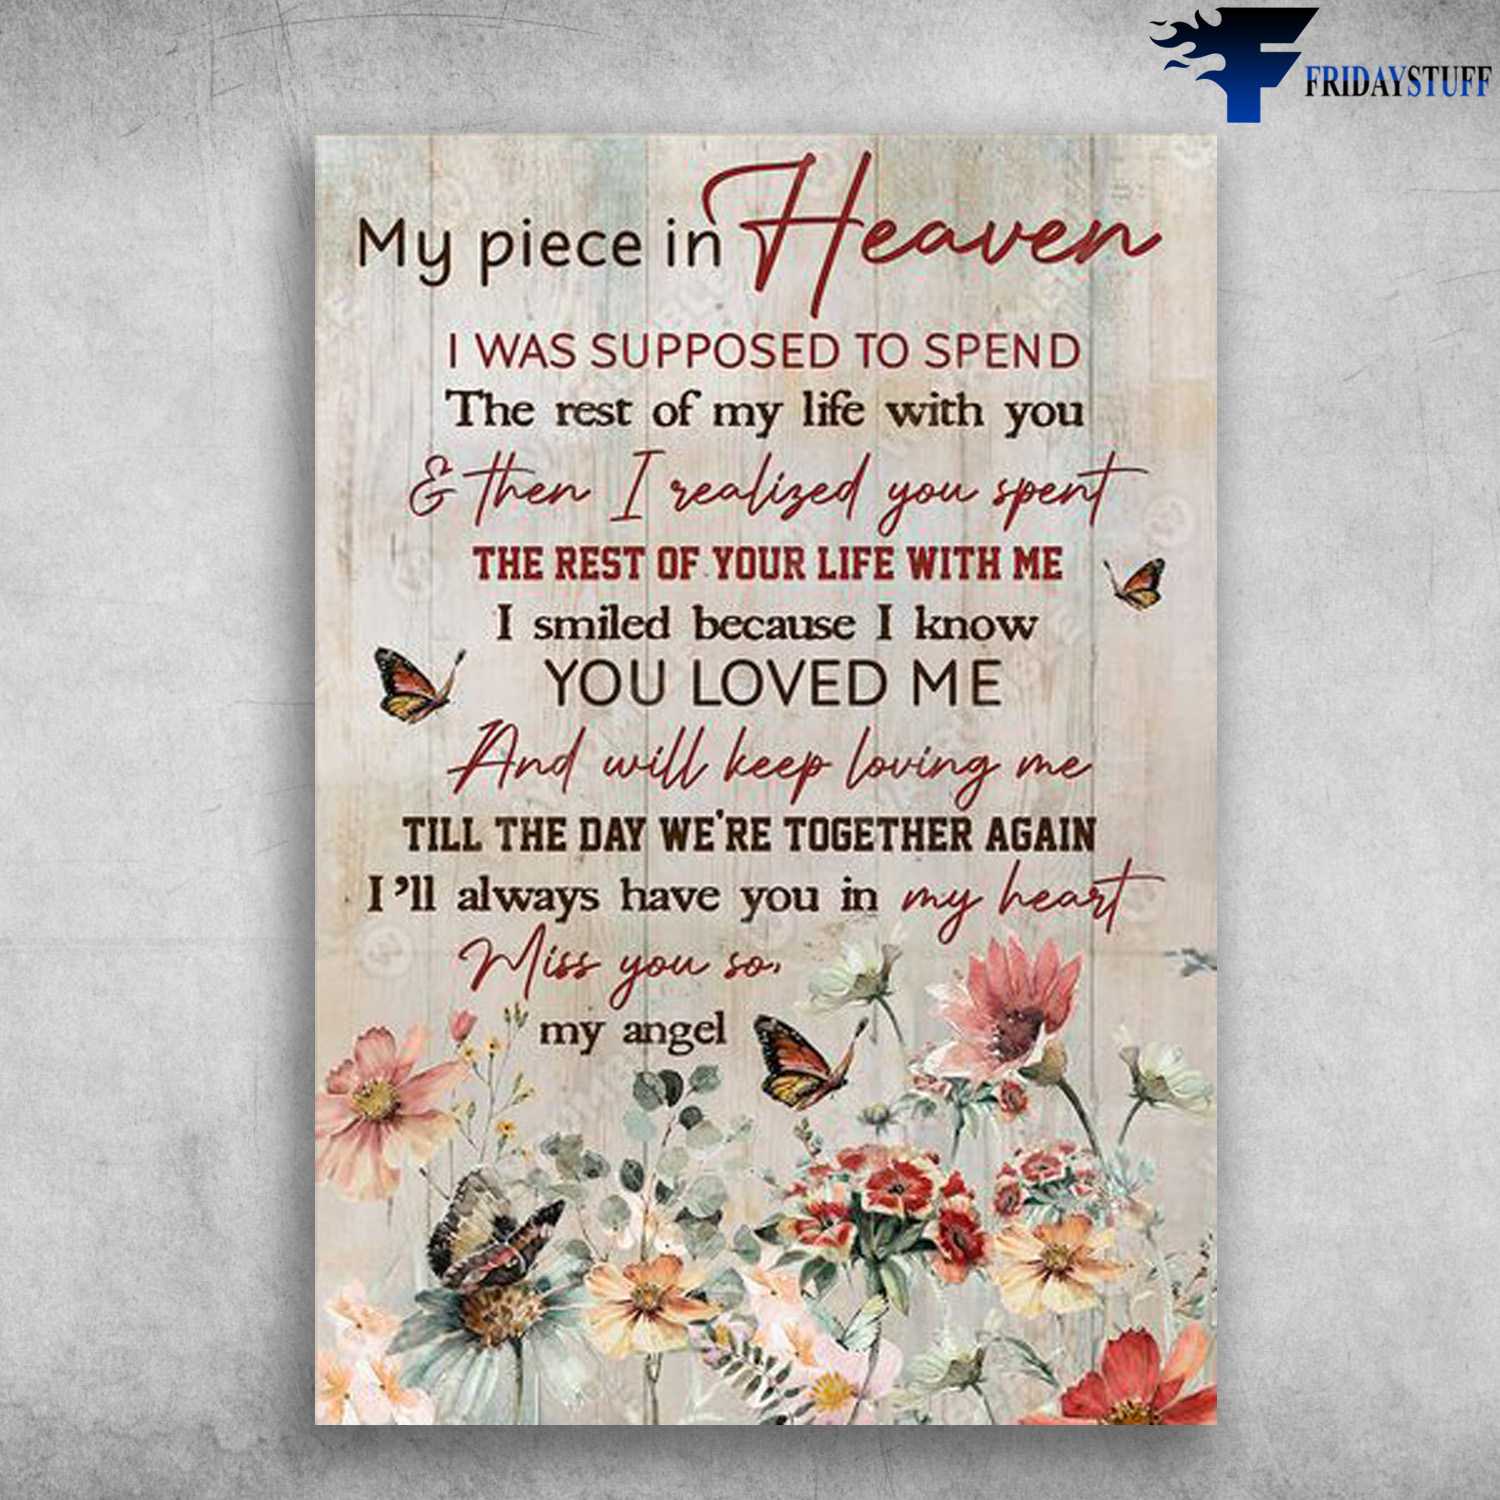 Flower Butterfly, Wall Poster, My Piece In Heaven, I Was Supposed To Spend, The Rest Of My Life With You, And Then I Realized You Spent, The Rest Of Your Life With Me,